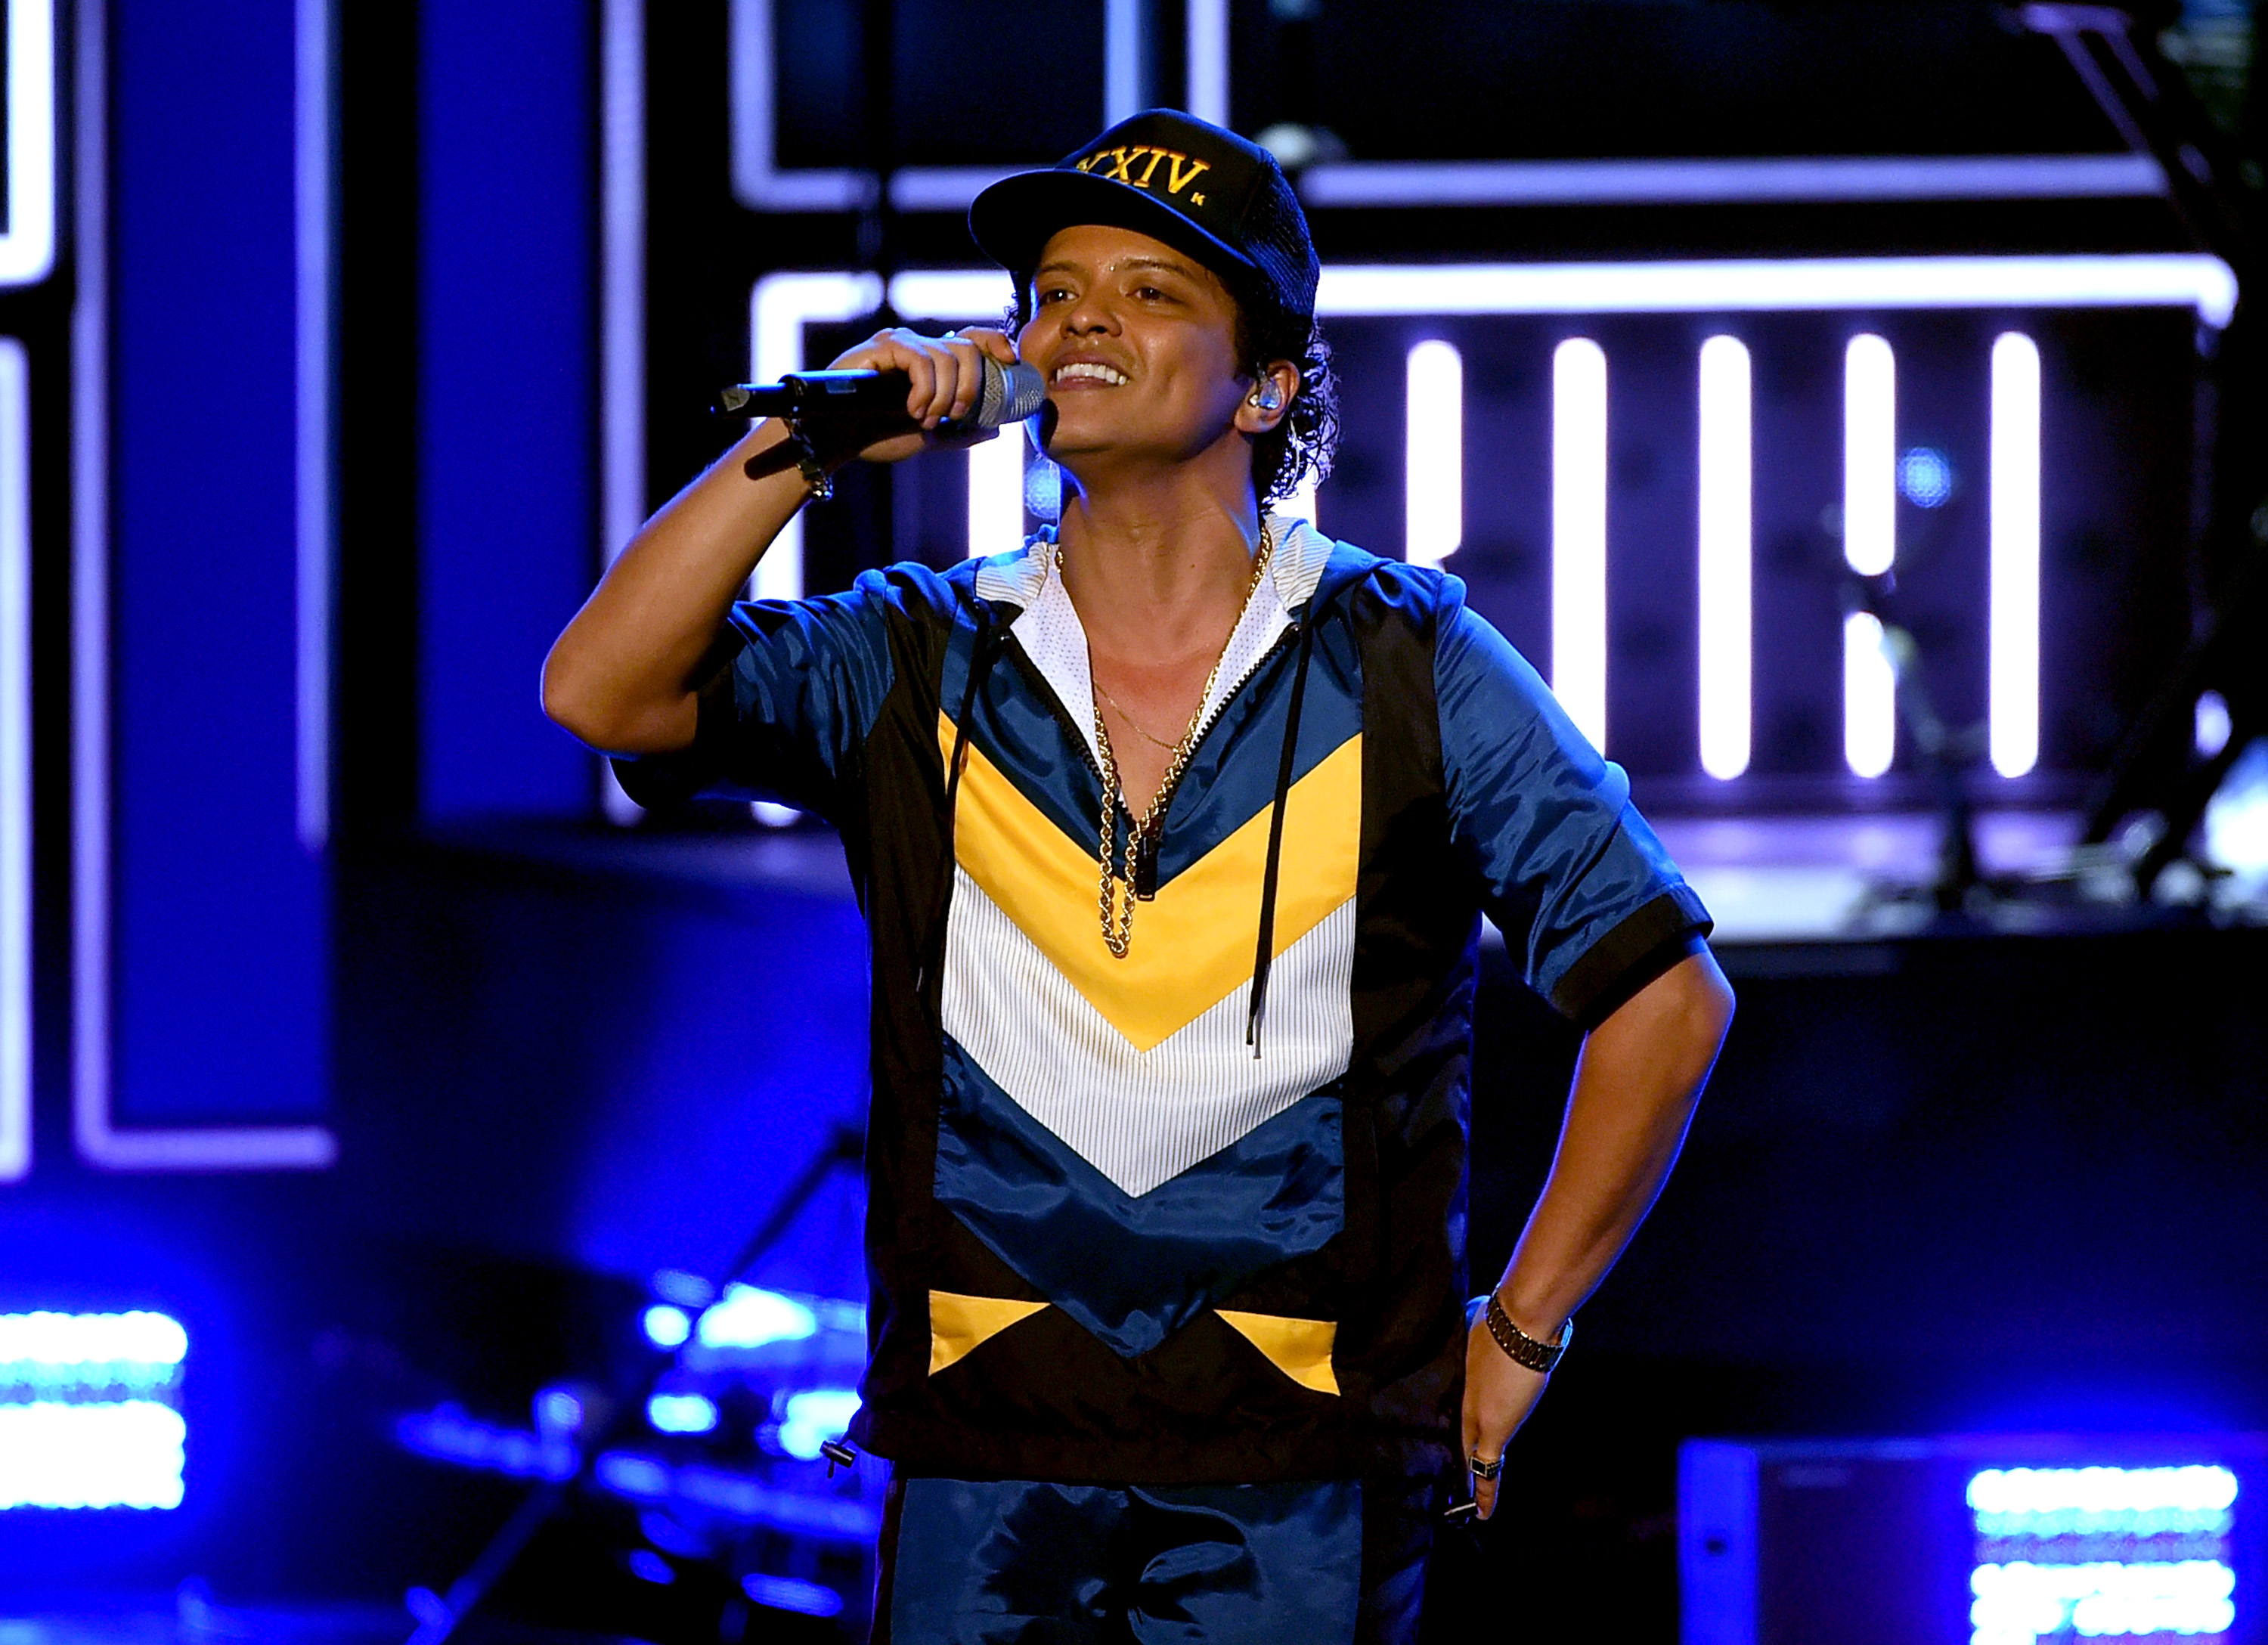 Bruno Mars performs during the American Music Awards on November 20, 2016 in Los Angeles, California. (Photo by Kevin Winter/Getty Images)